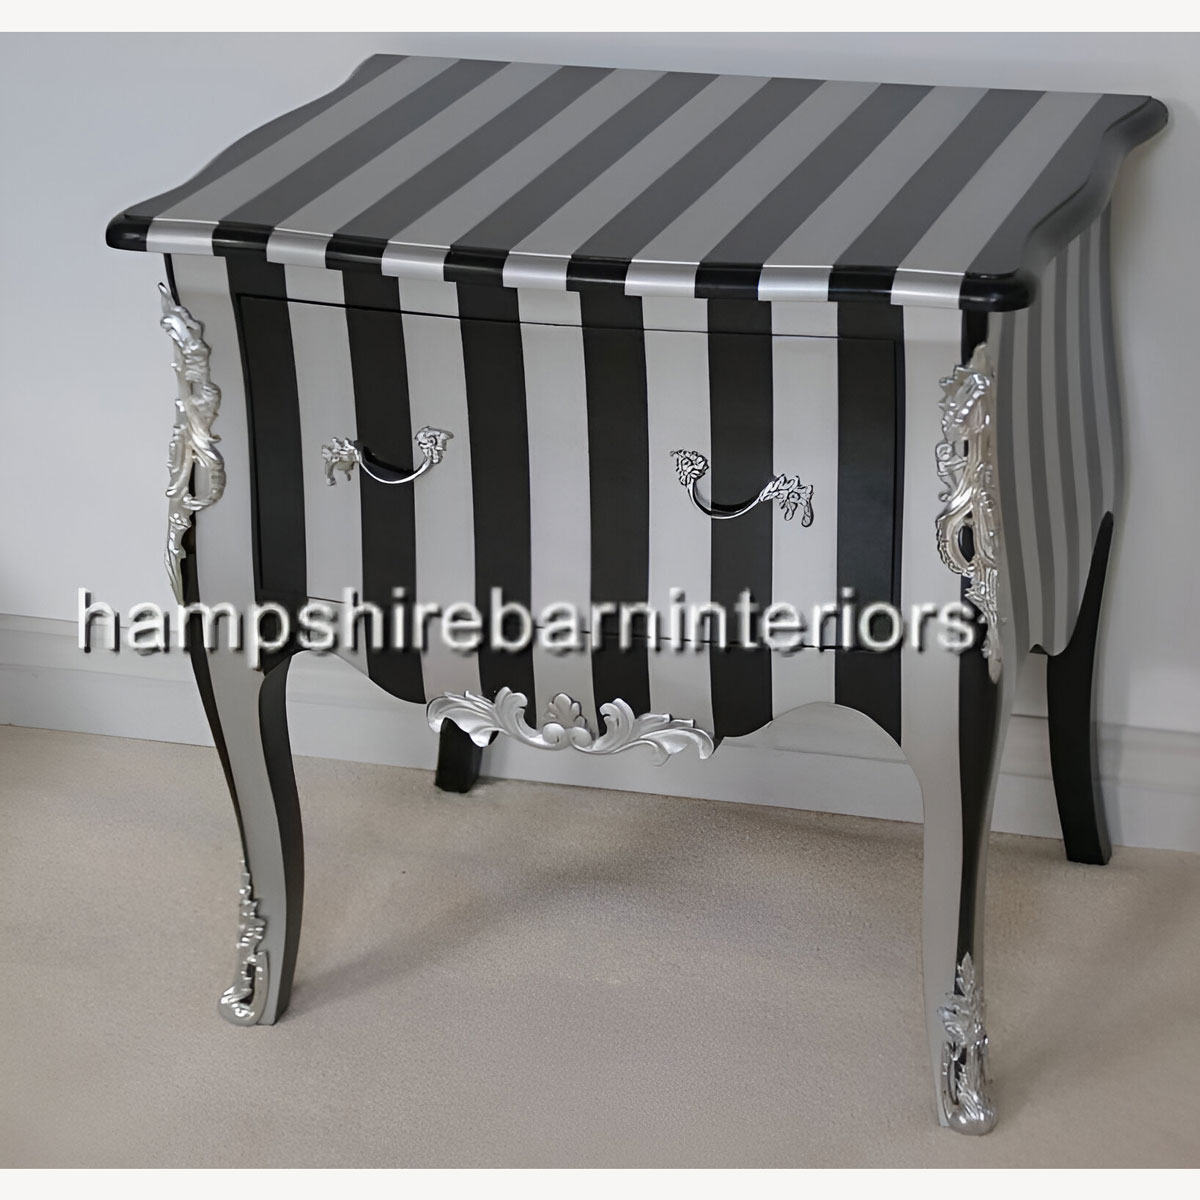 A Black Silver Stripe Designers Side Cabinet With Metallic Edges 2 - Hampshire Barn Interiors - A Black & Silver Stripe Designers Side Cabinet (With Metallic Edges) -